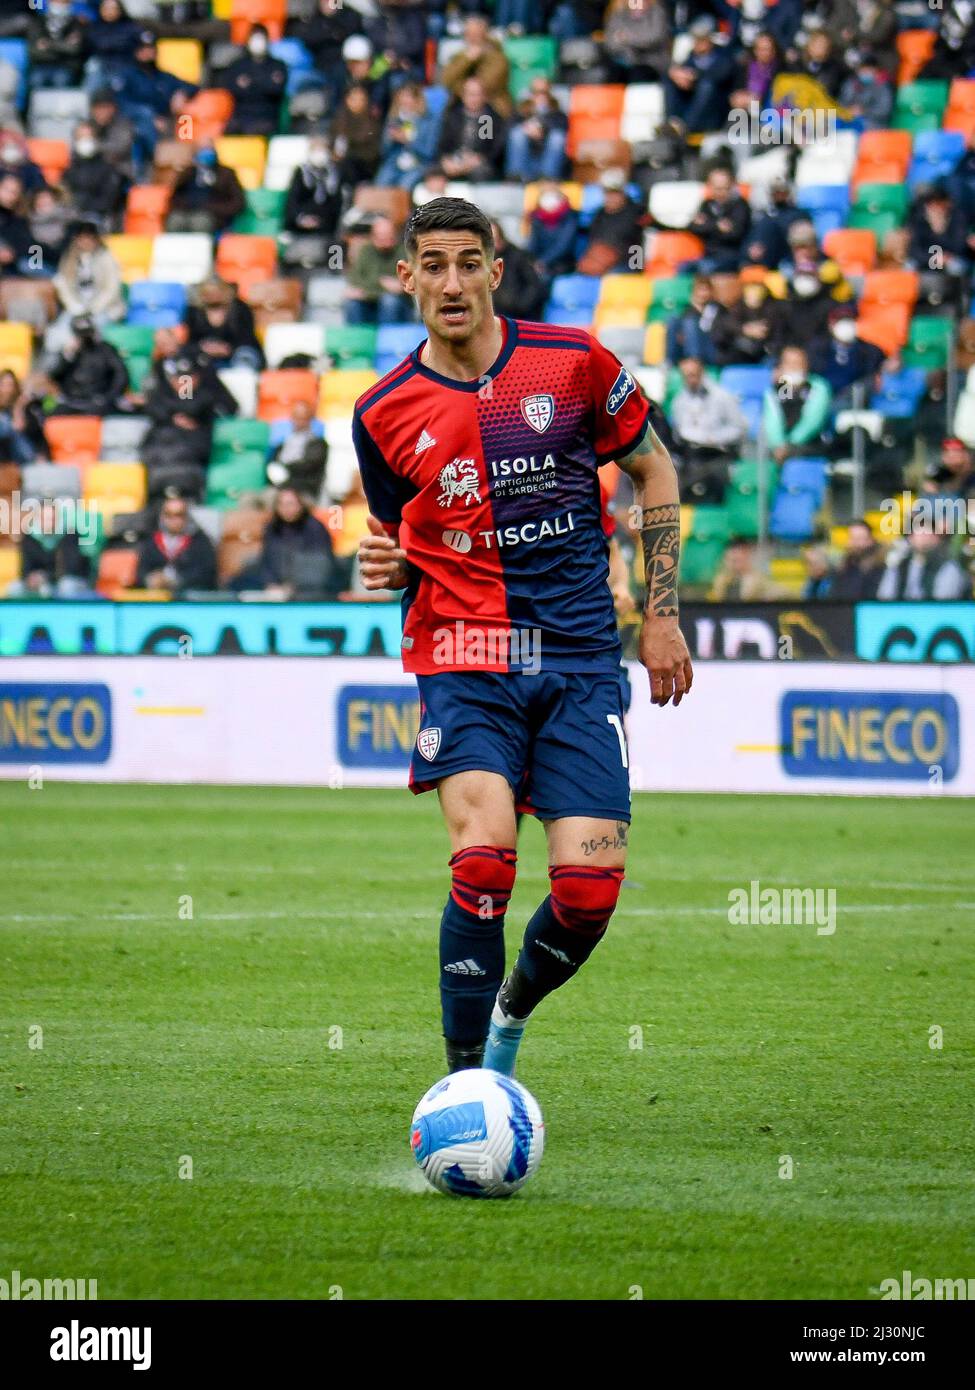 Alessandro Deiola of Cagliari in action during the Serie A match